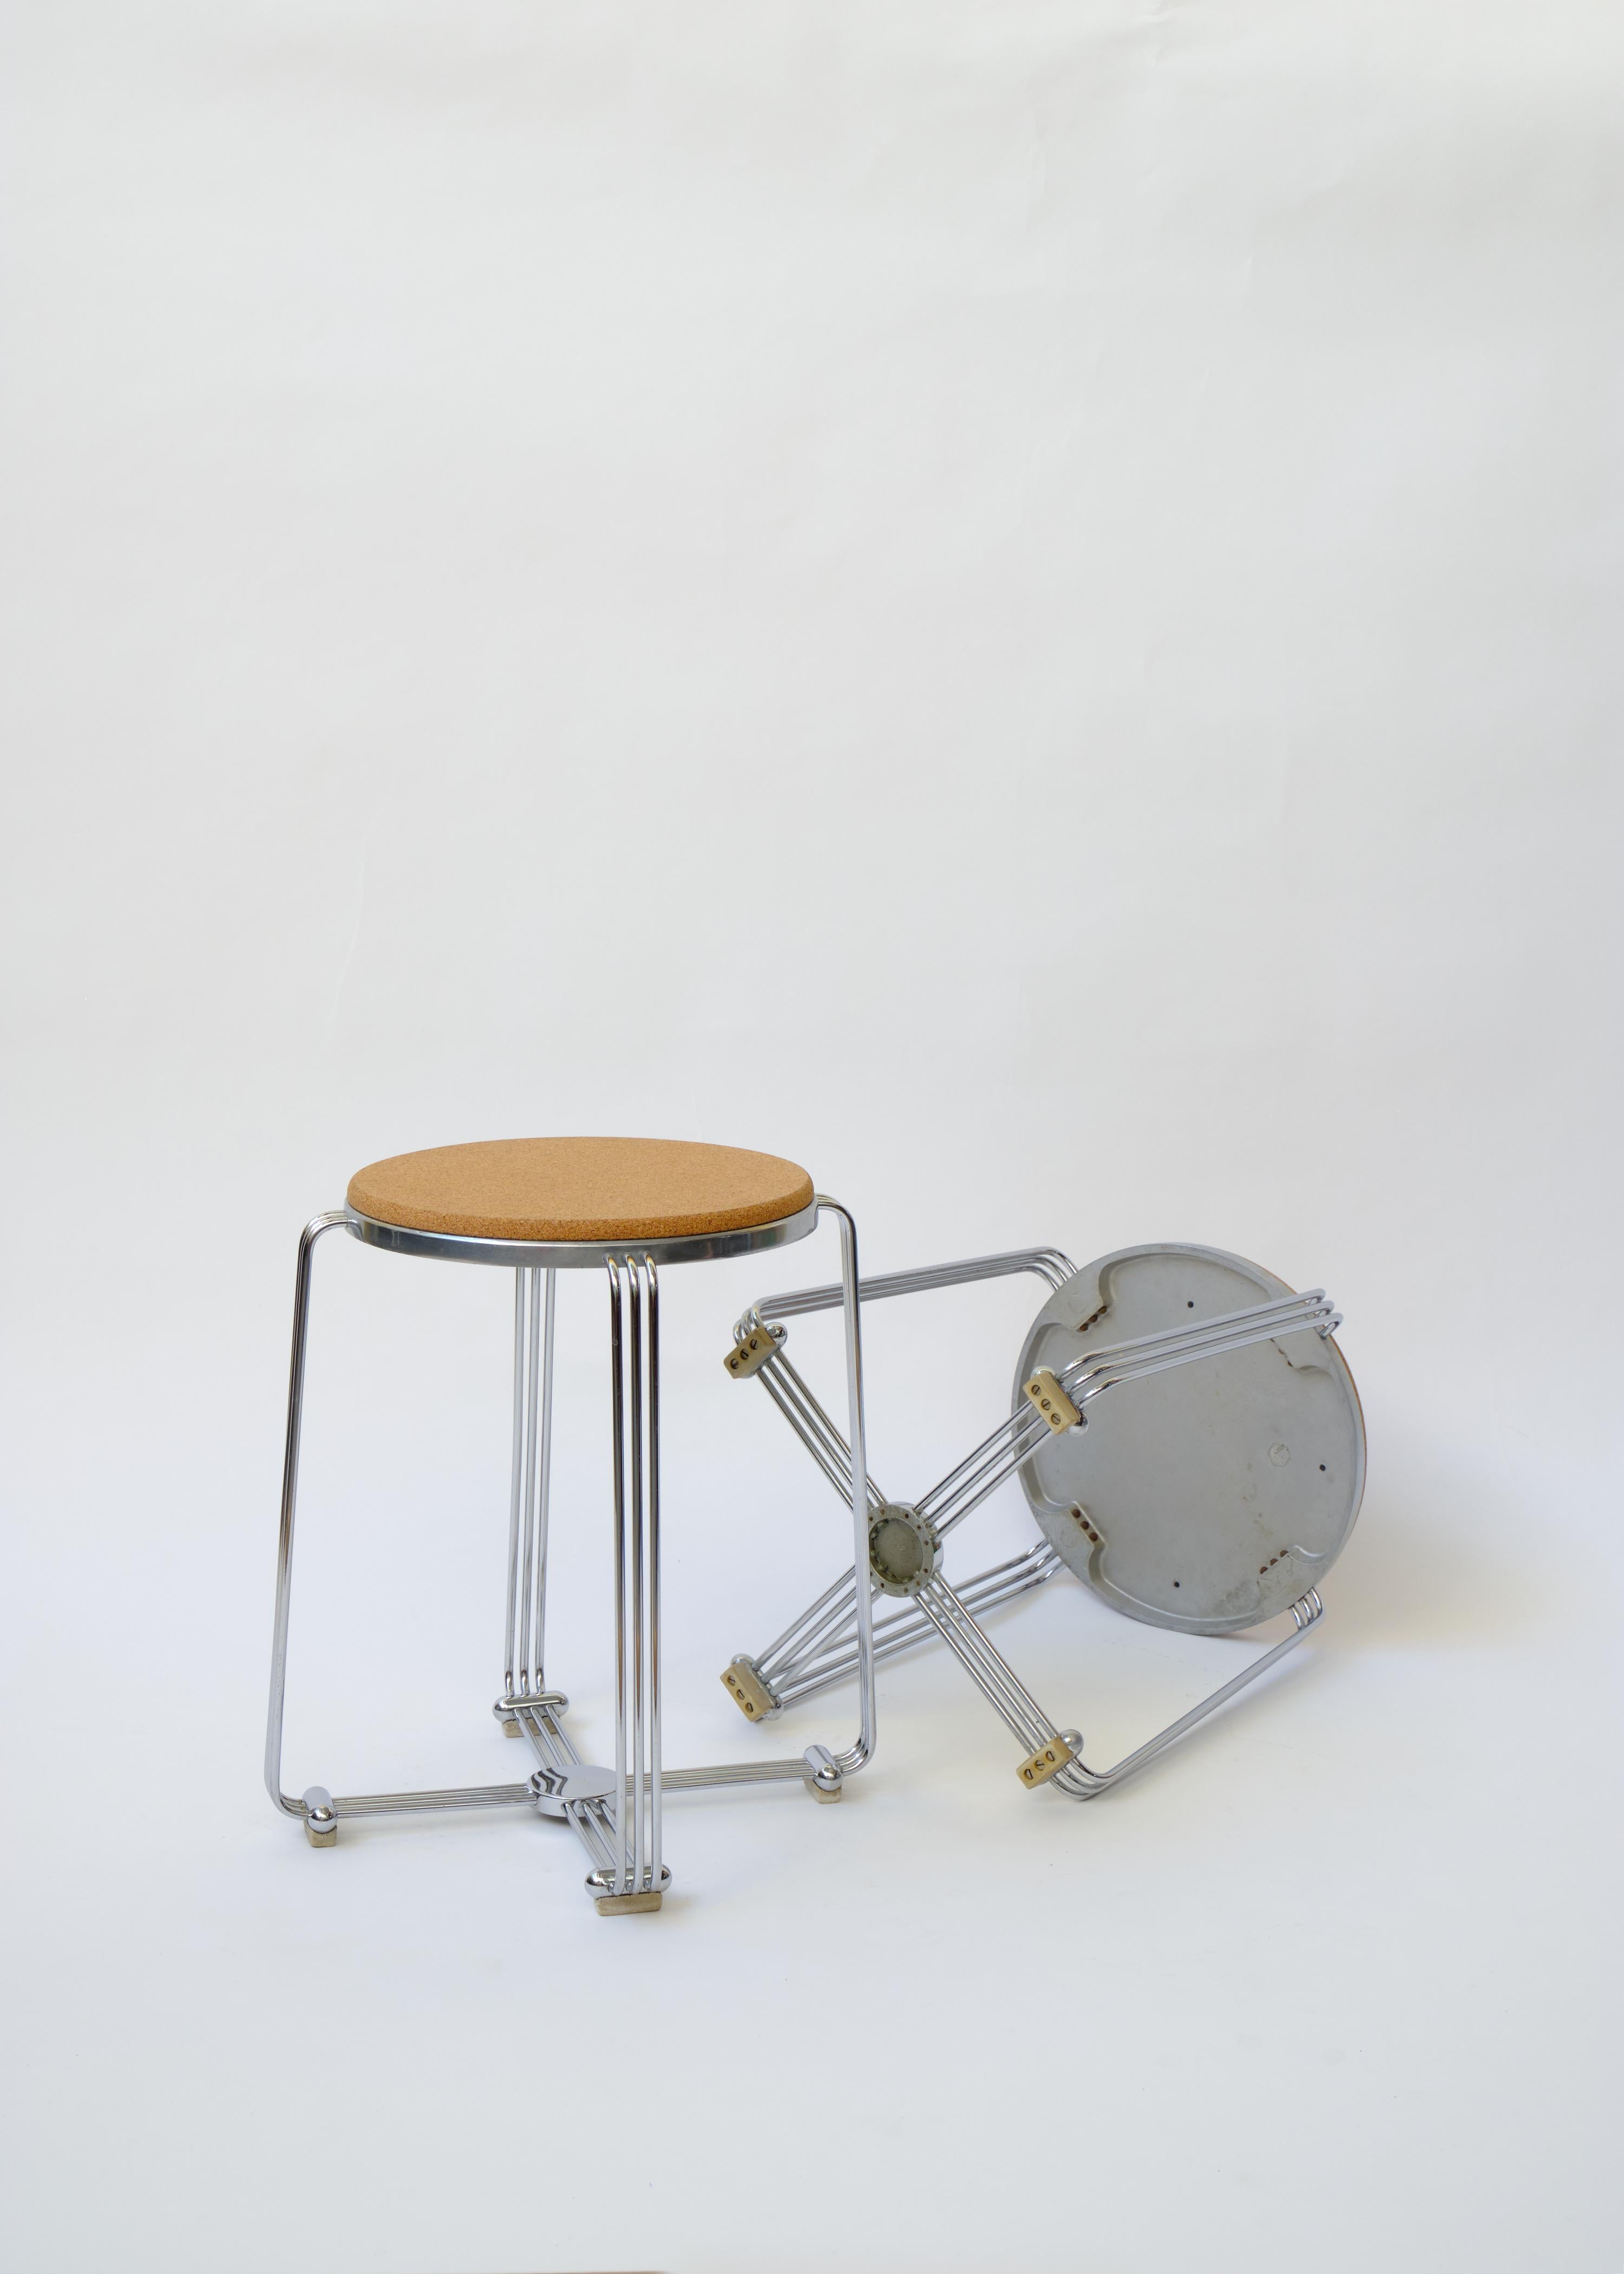 20th Century Art Deco Alpax Chrome and Cork Stool or Side Table For Sale